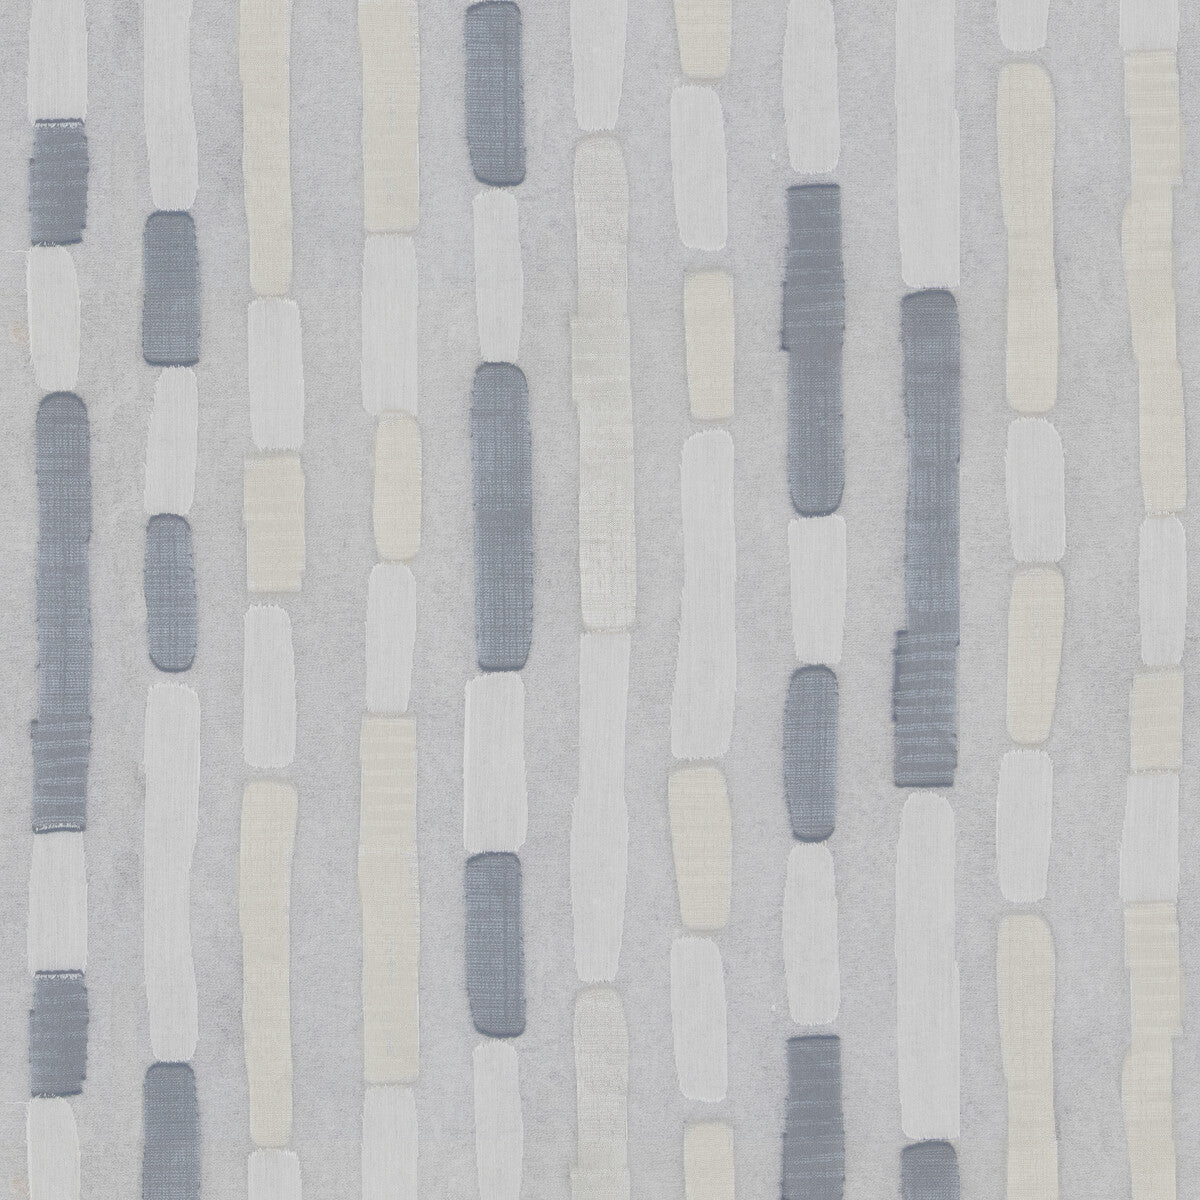 Kravet Contract fabric in 4527-121 color - pattern 4527.121.0 - by Kravet Contract